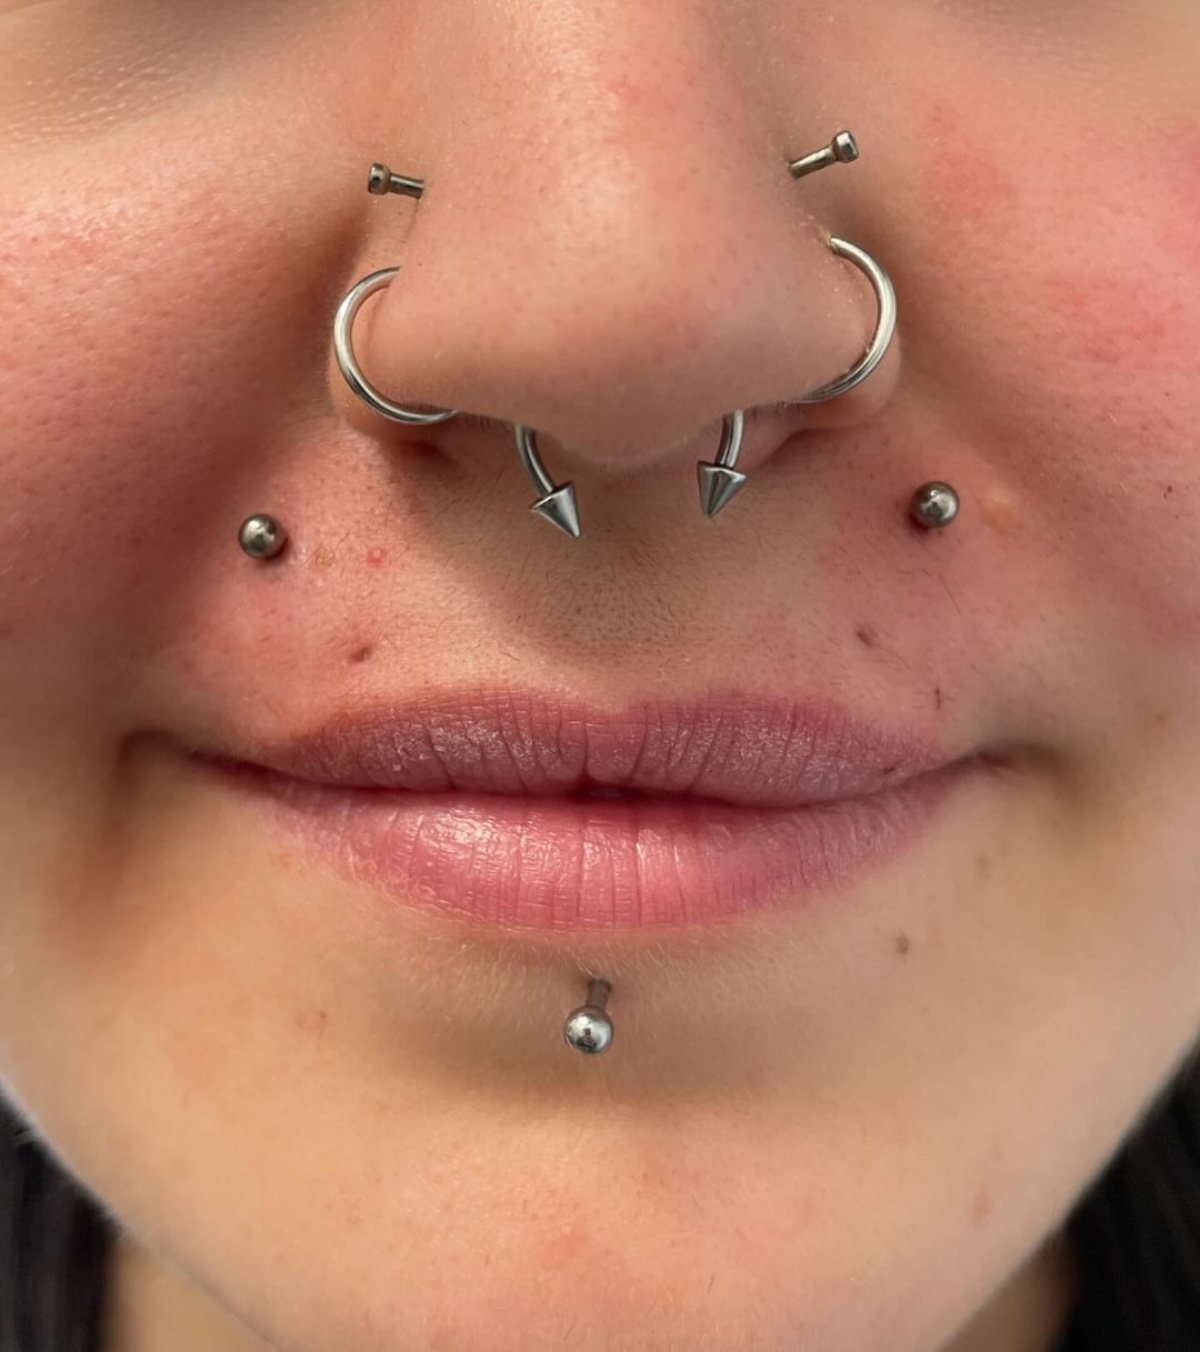 5 nose and mouth piercings